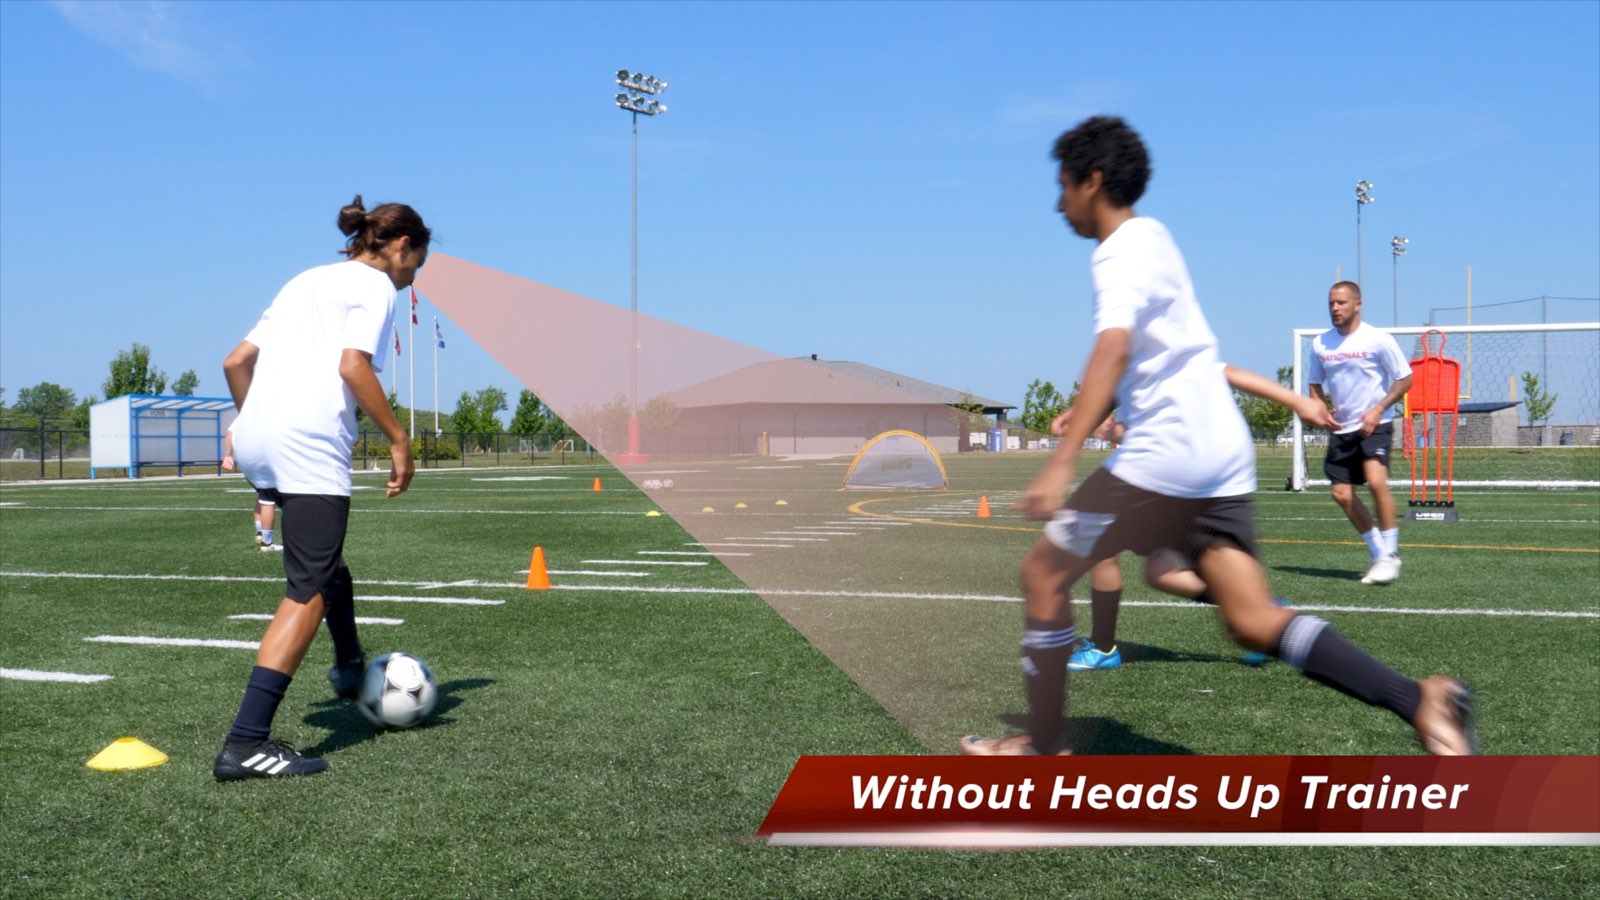 Heads Up Trainer 11